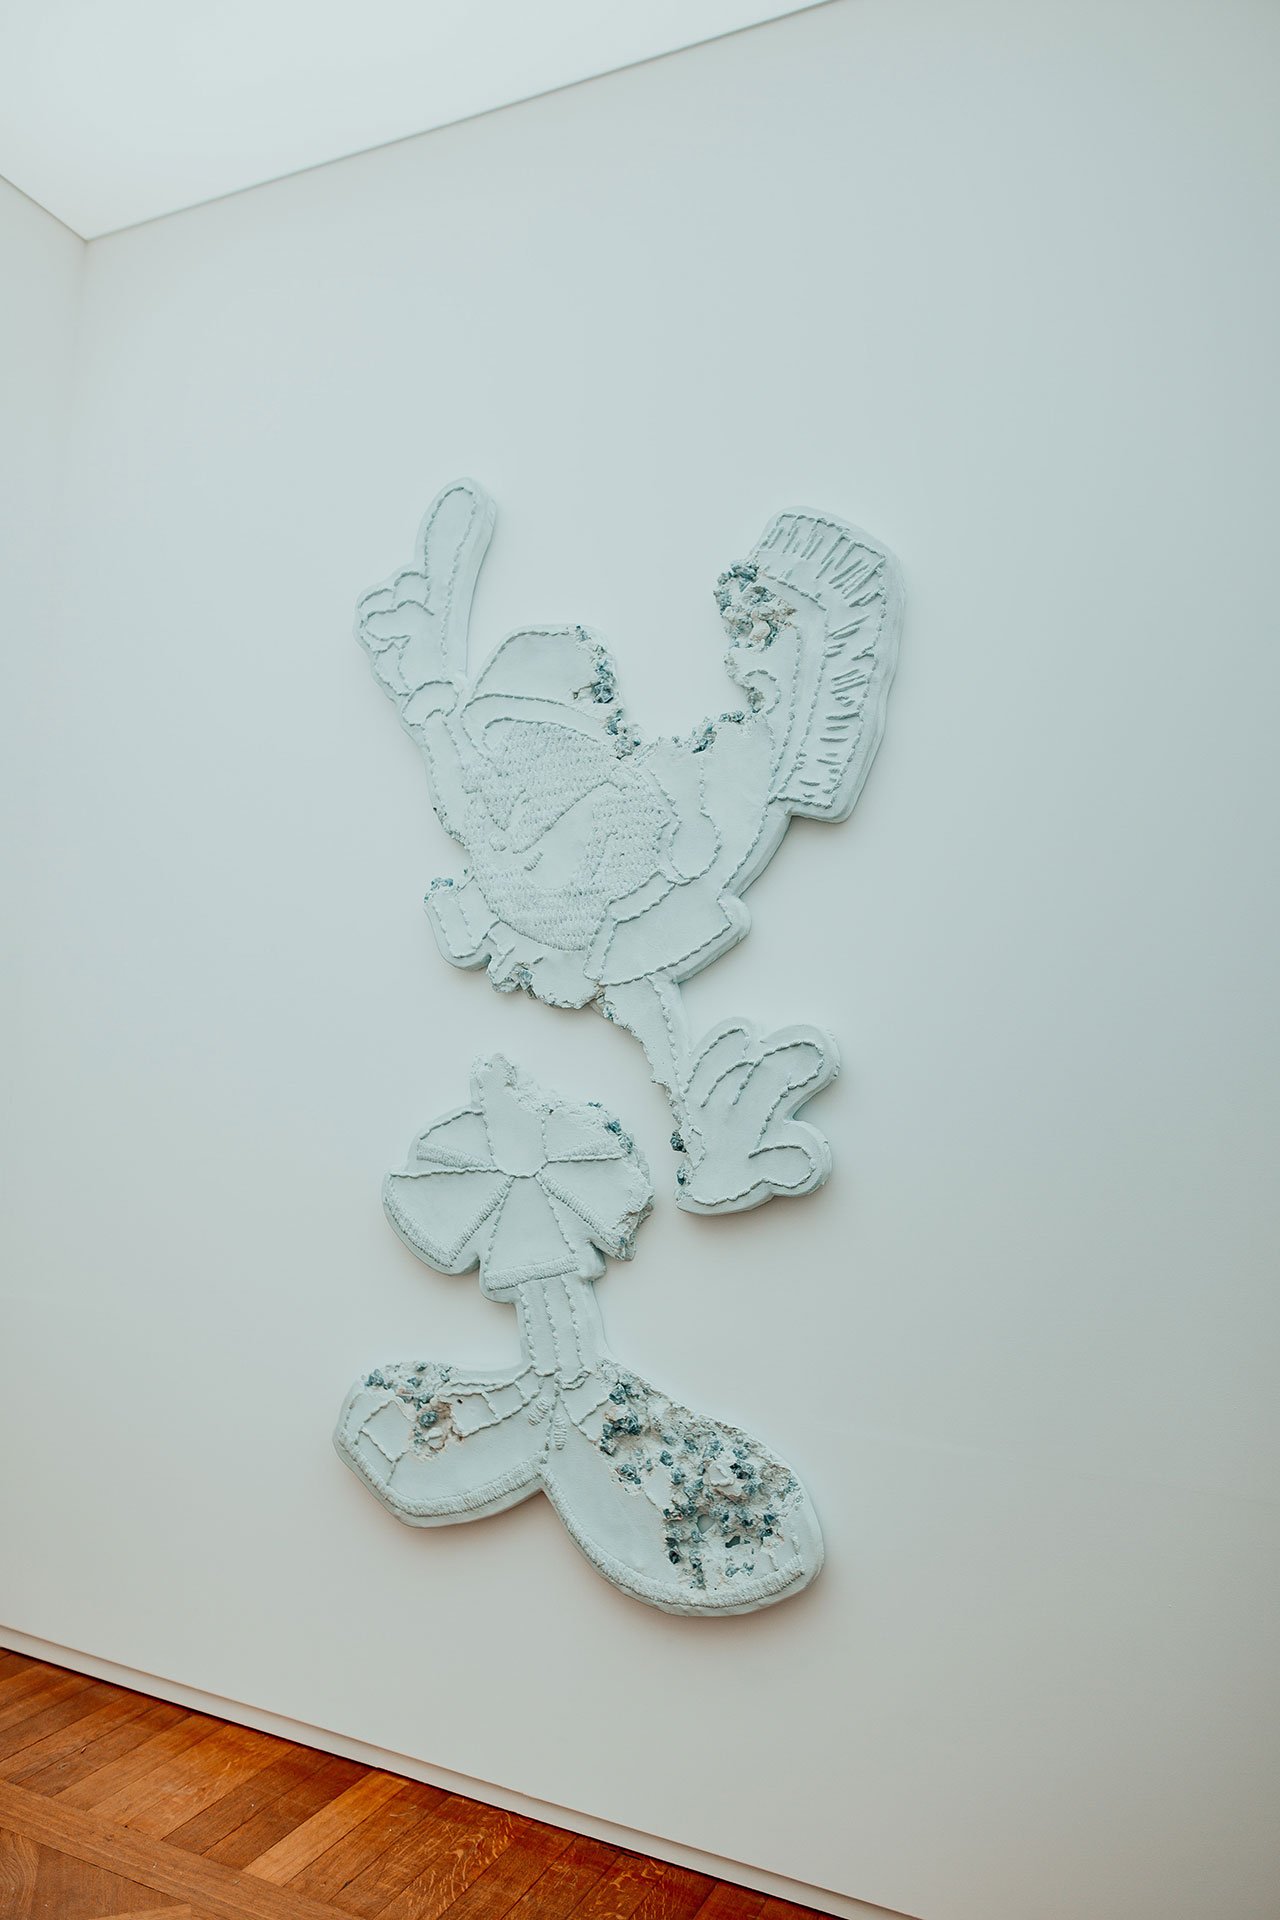 Daniel Arsham, Eroded Patches. Exhibition view at Moco Museum in Amsterdam. Photo by Isabel Janssen.